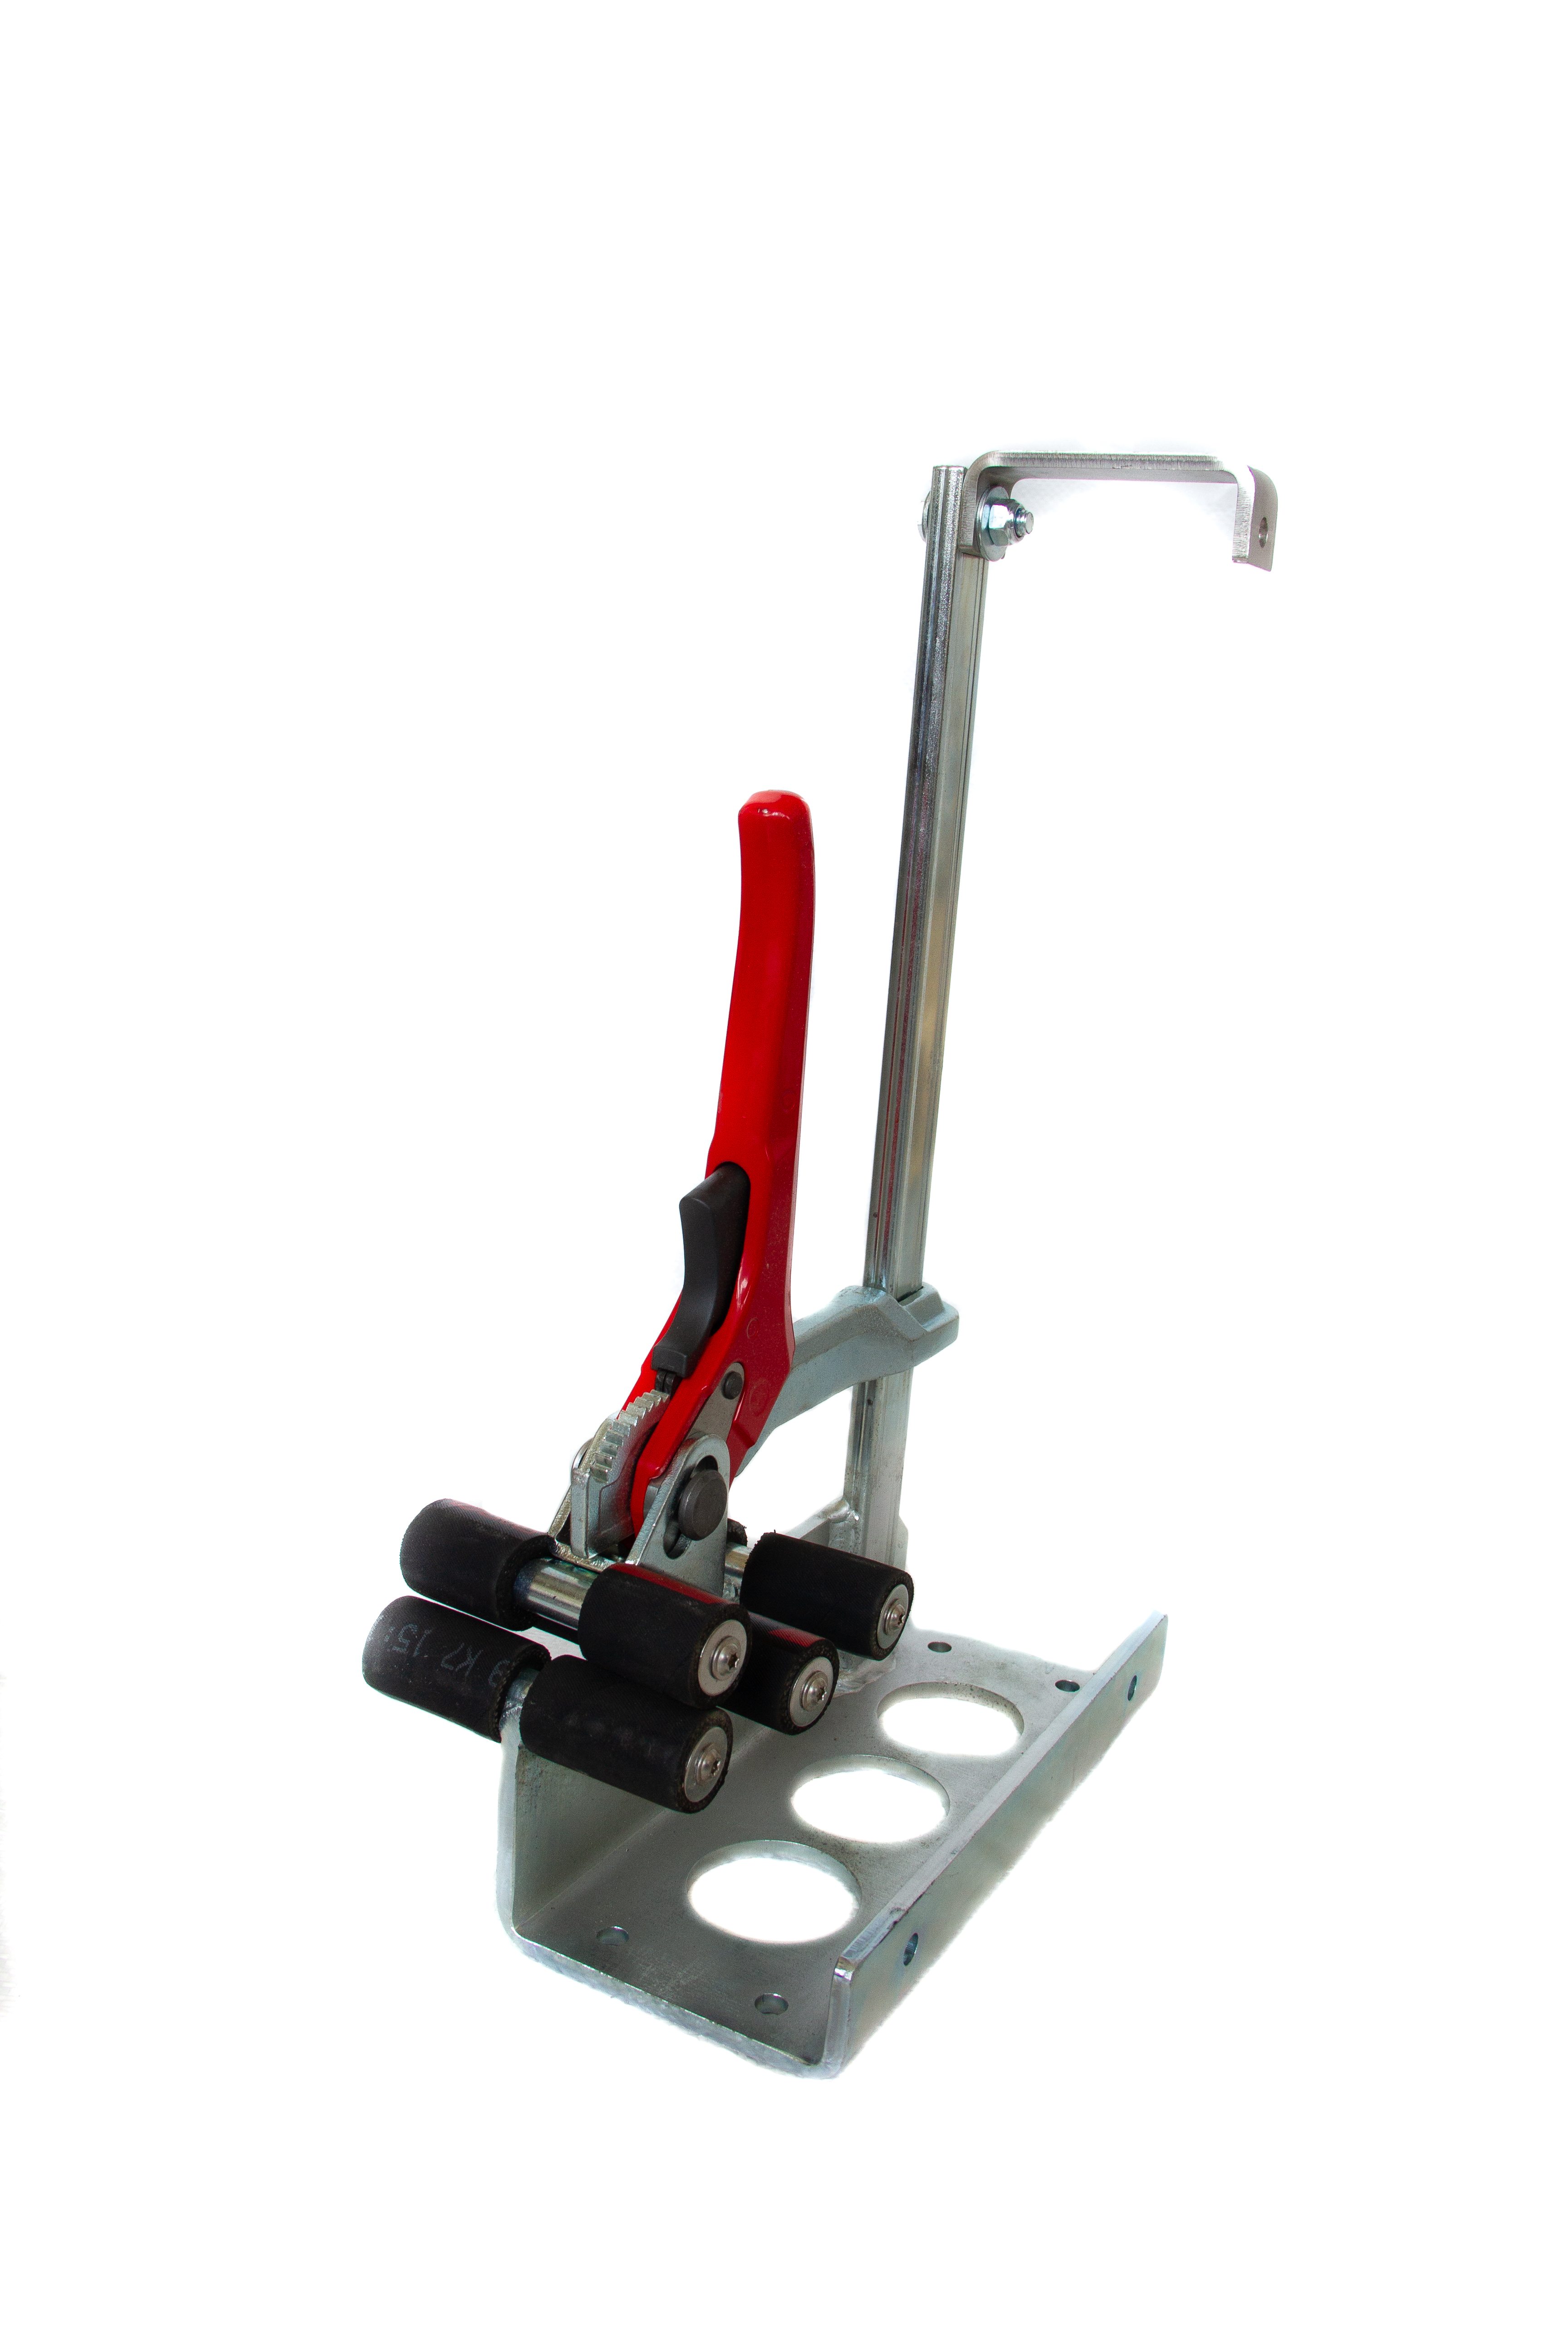 Stationary clamp for cramping cylinders - 2